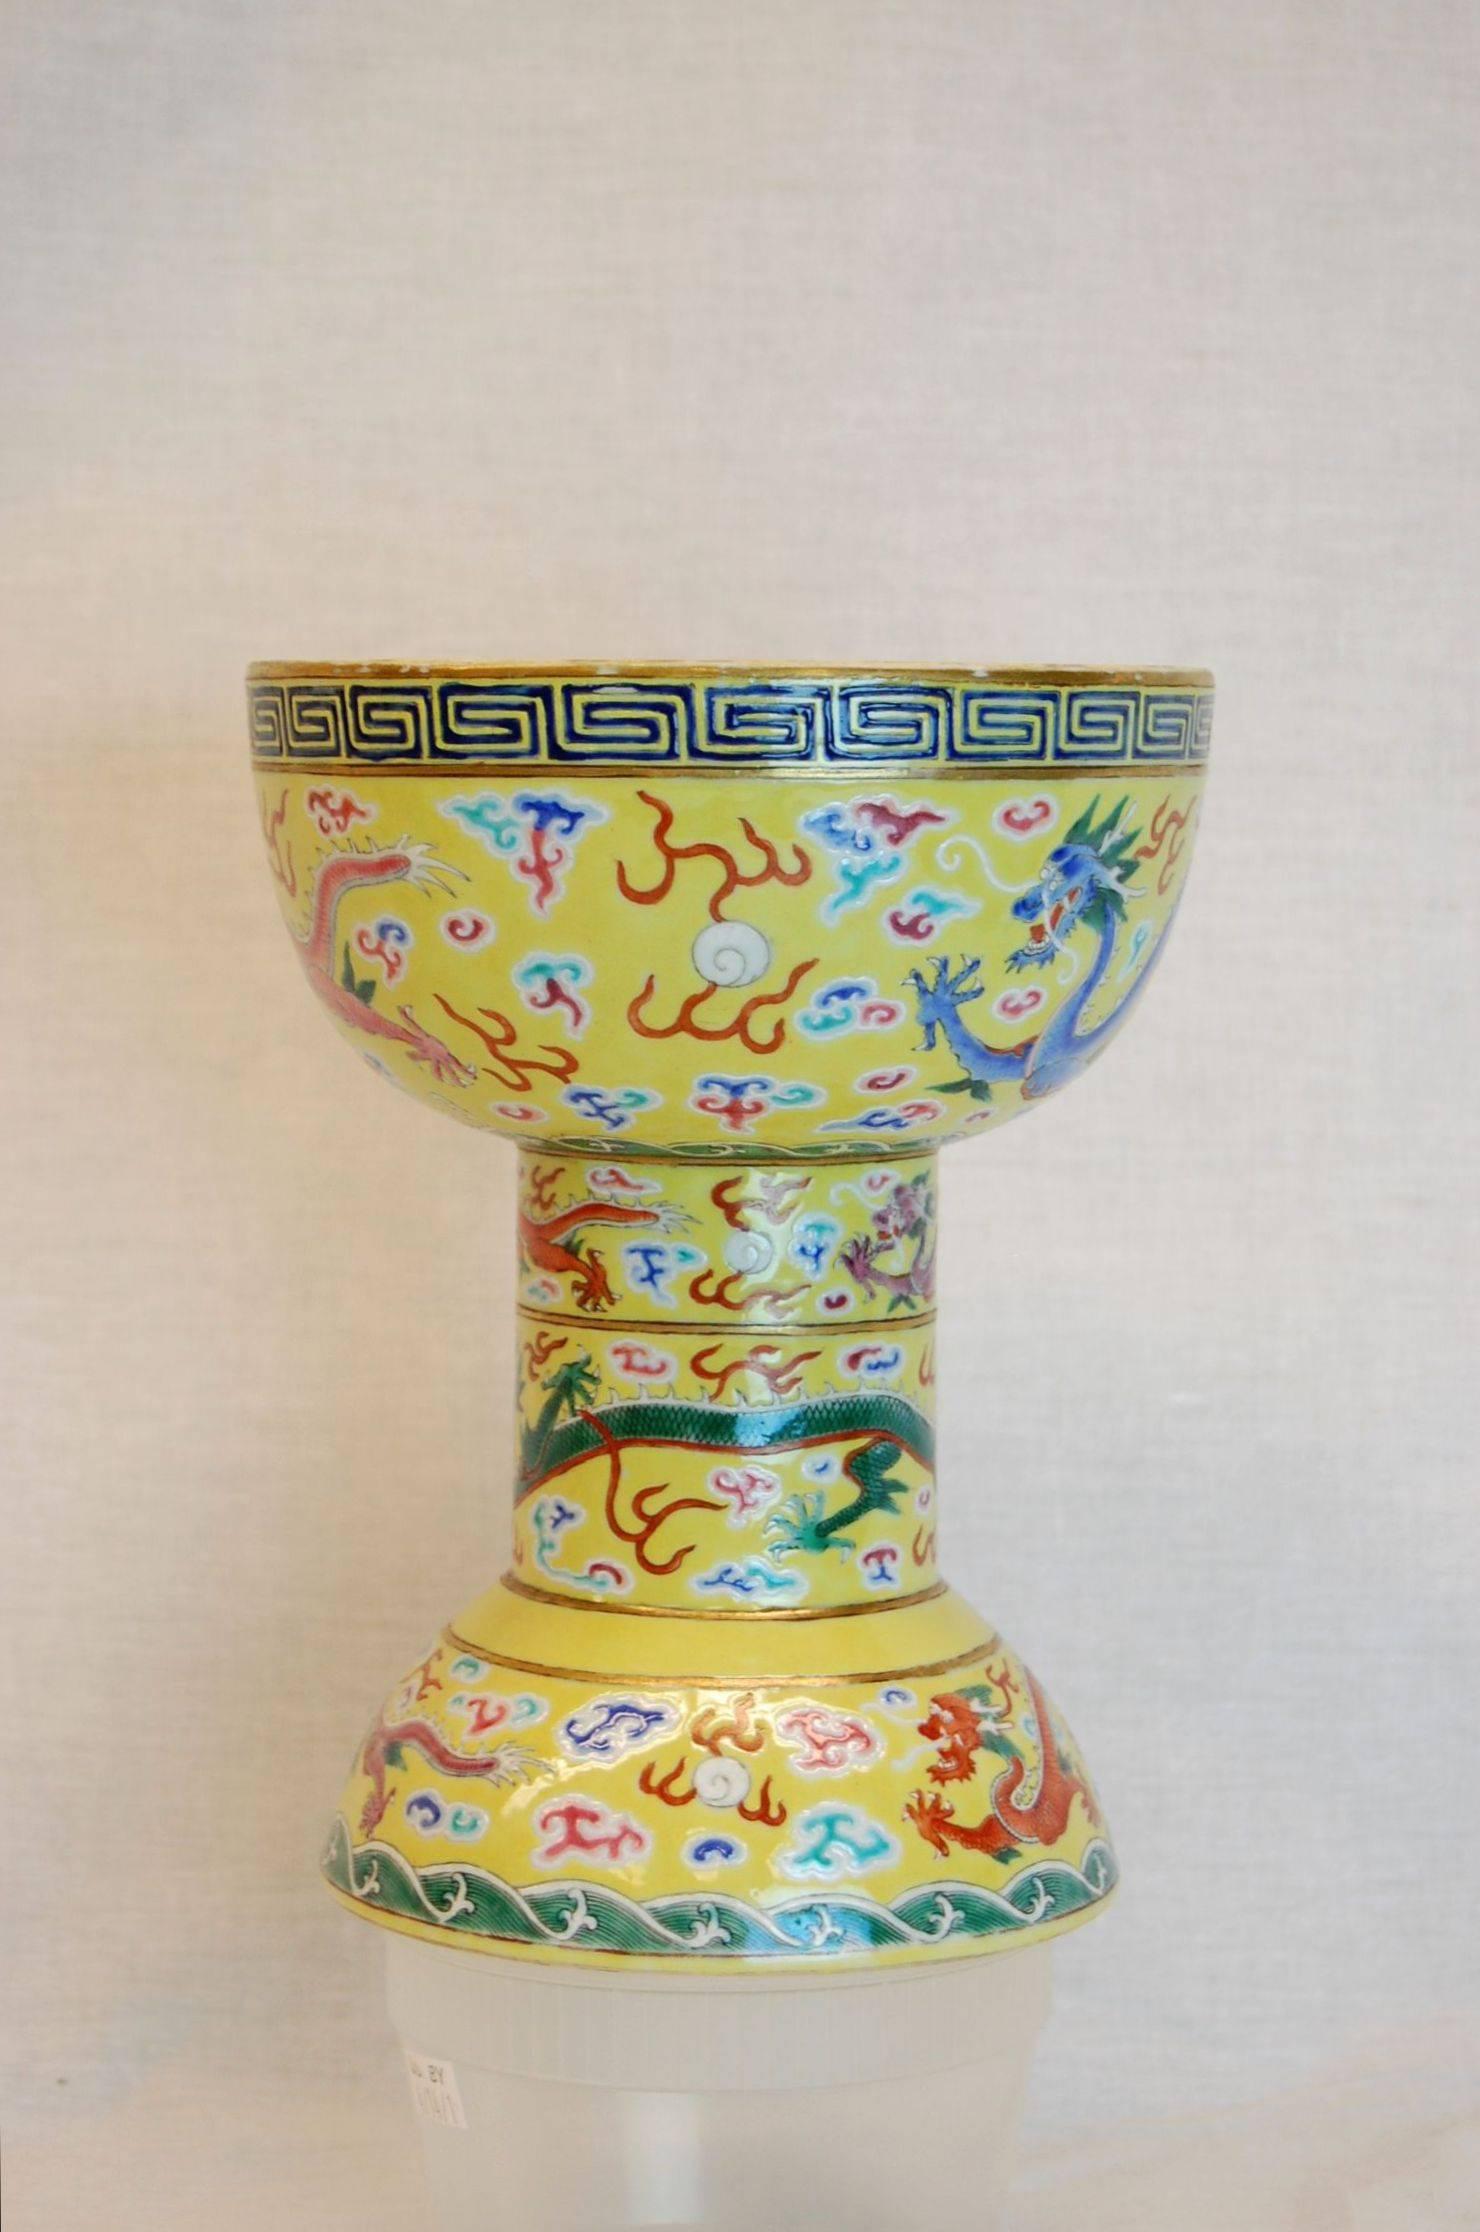 An early 20th century cup in a green/ yellow background decorated with dragons of various colors and shapes encircling the three areas of the cup.